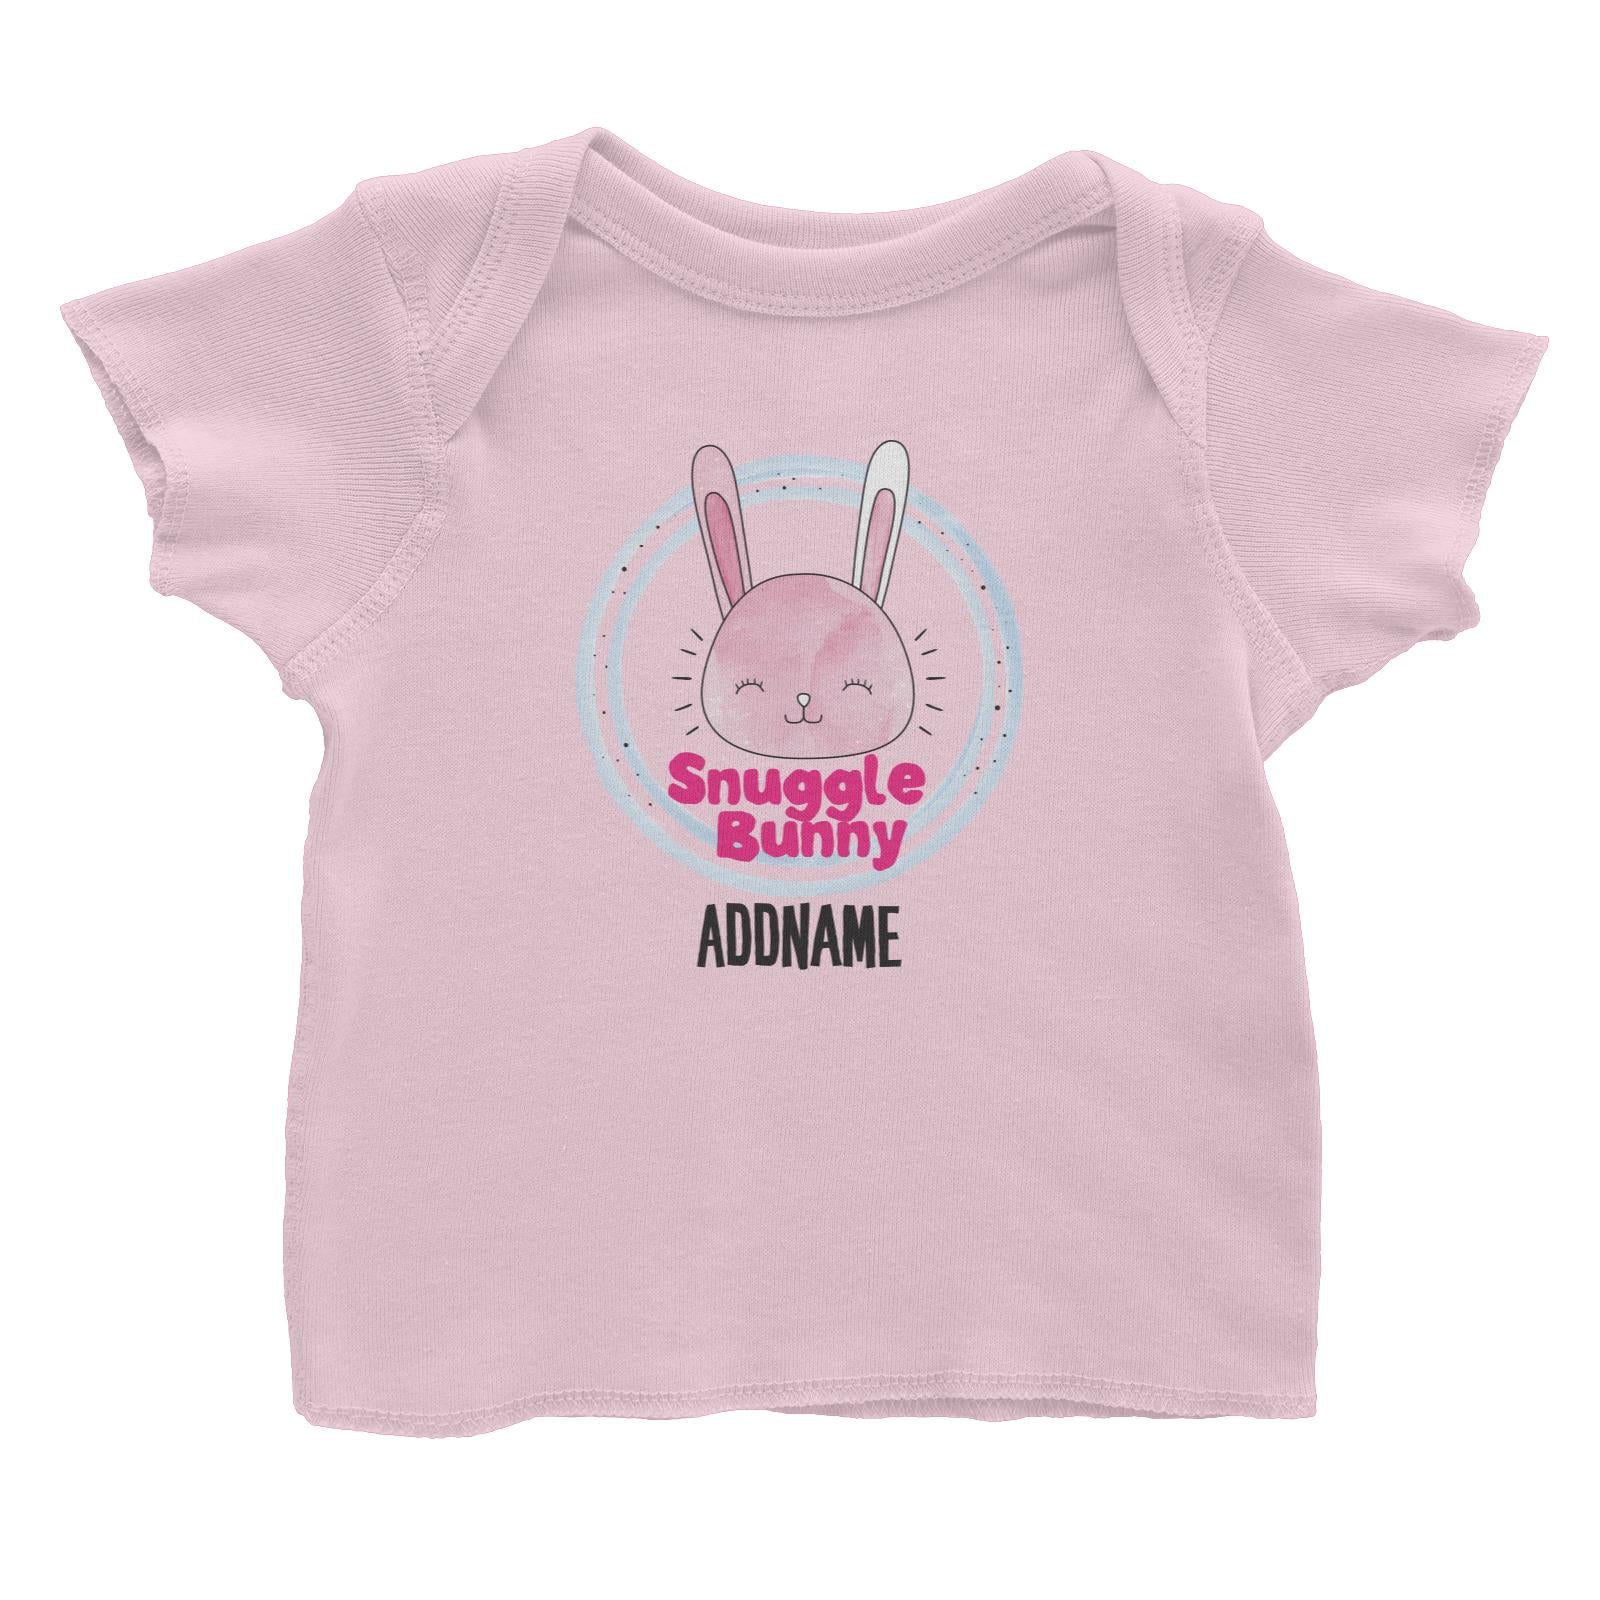 Cool Vibrant Series Snuggle Bunny Addname Baby T-Shirt